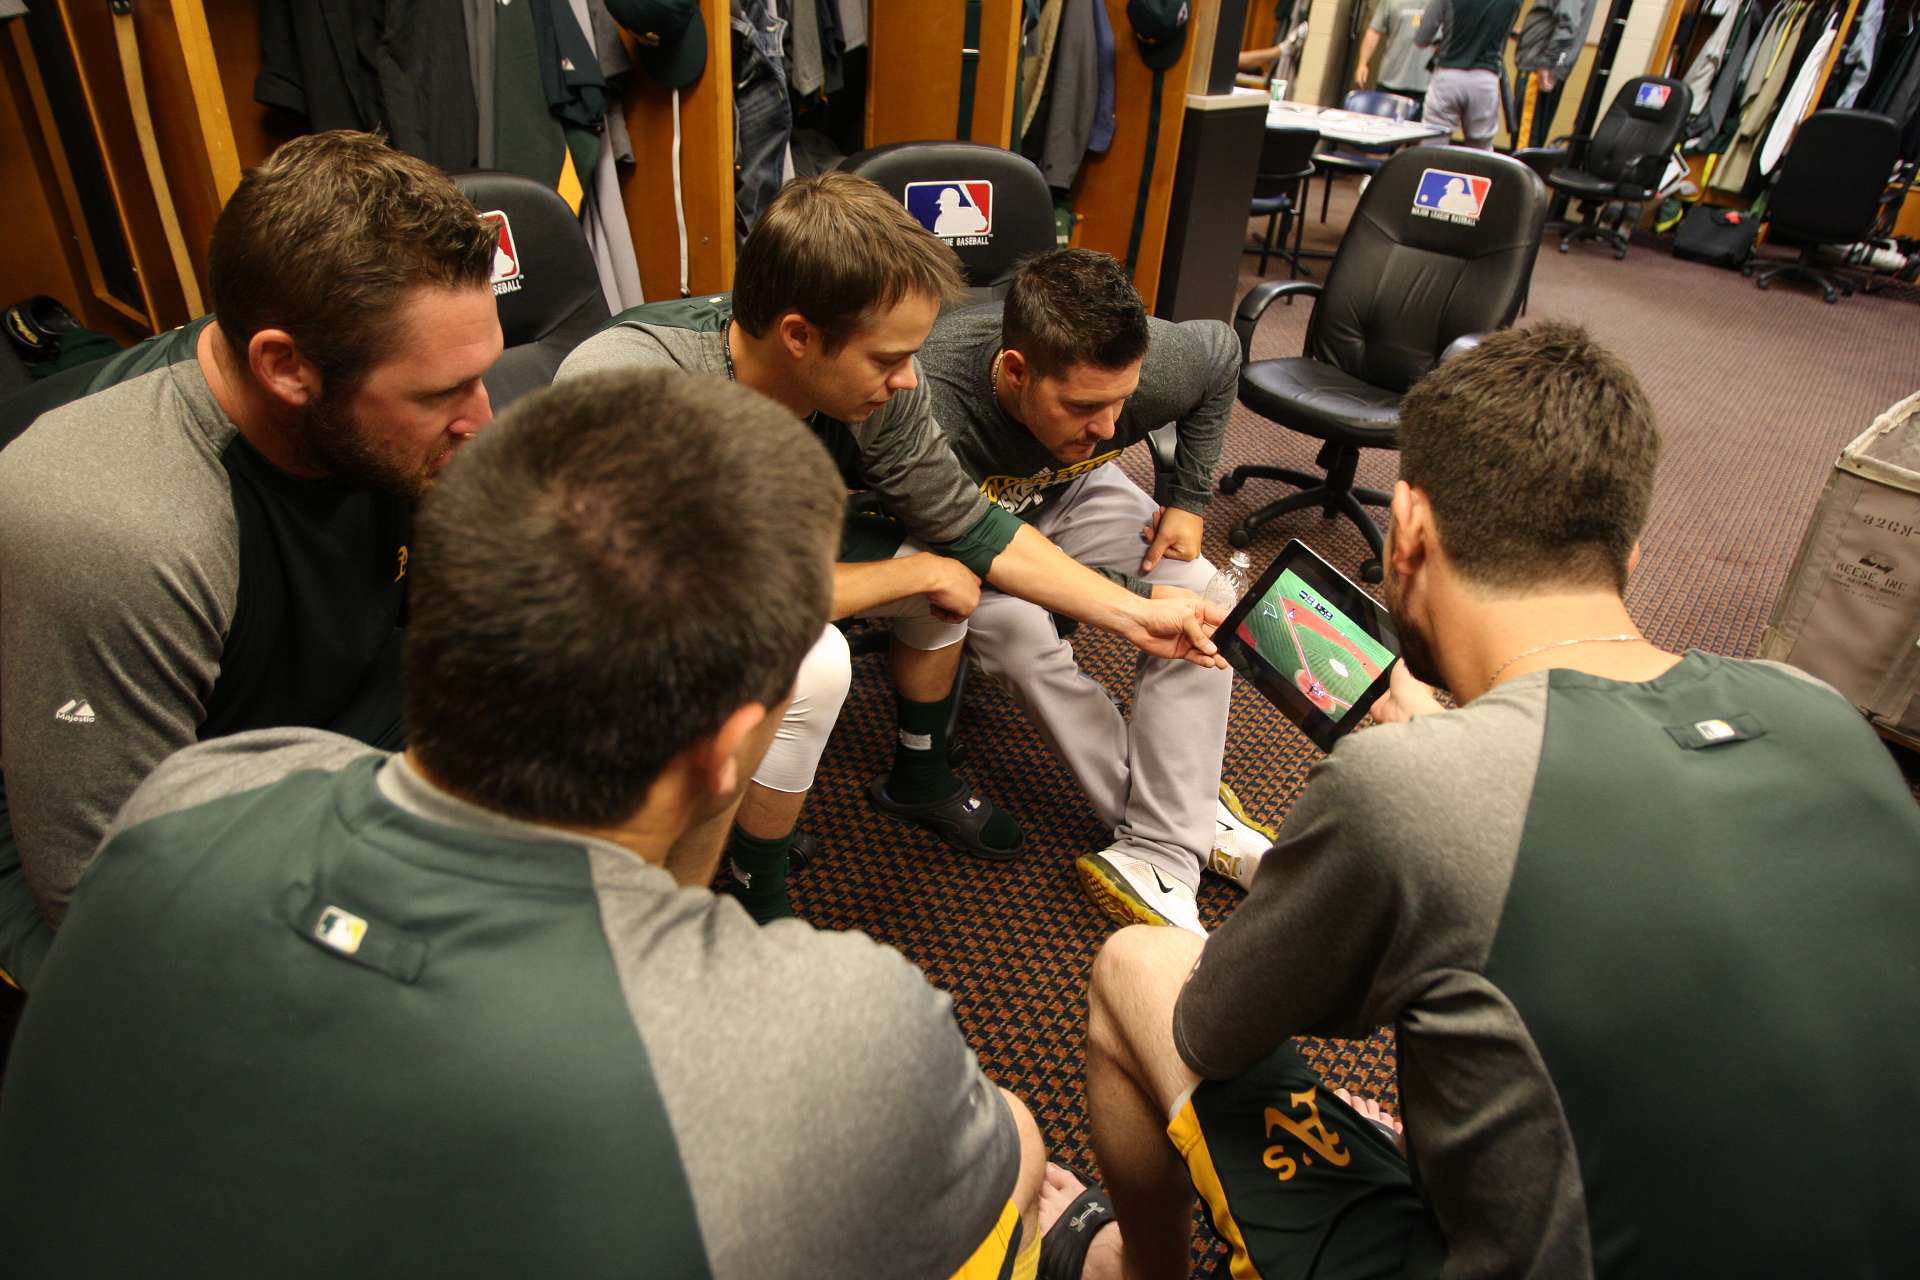 Members of the Oakland Athletics pitching staff watch highlights of the Athletics on an iPad in the clubhouse prior to the game against the Detroit Tigers at Comerica Park on October 6, 2012 in Detroit, Michigan.